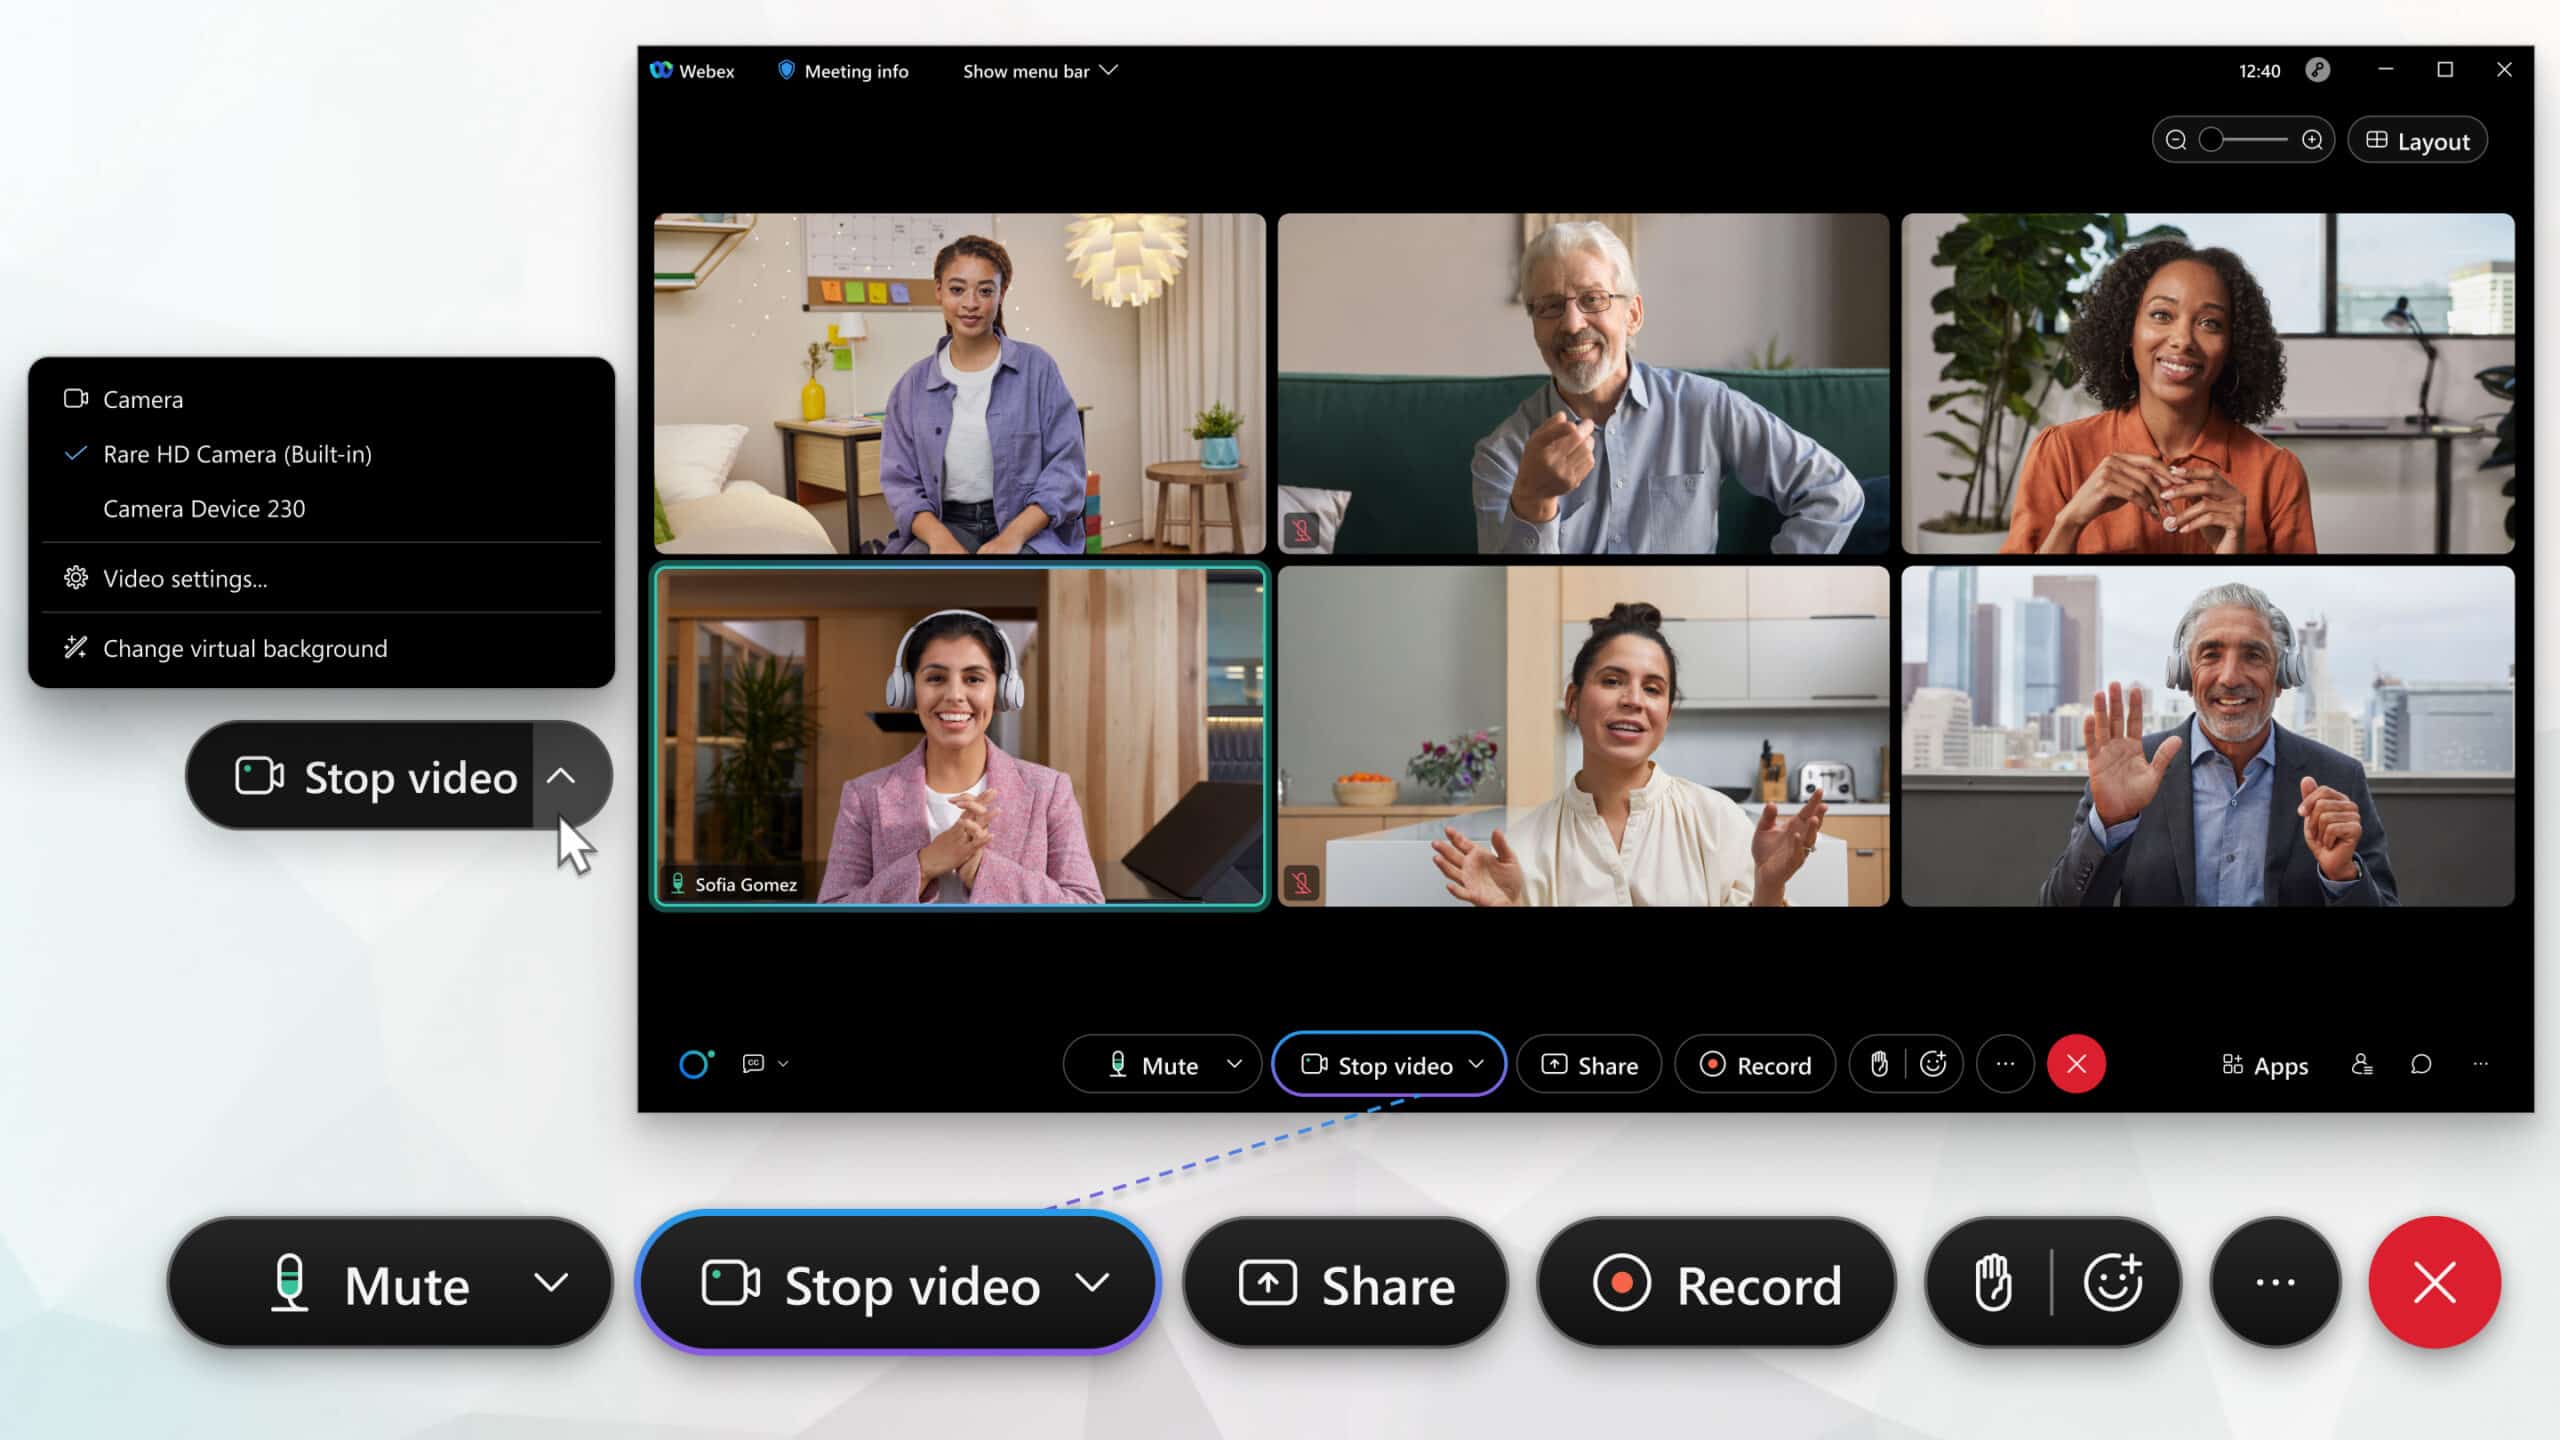 Start or stop your video during a Webex meeting, webinar, or event